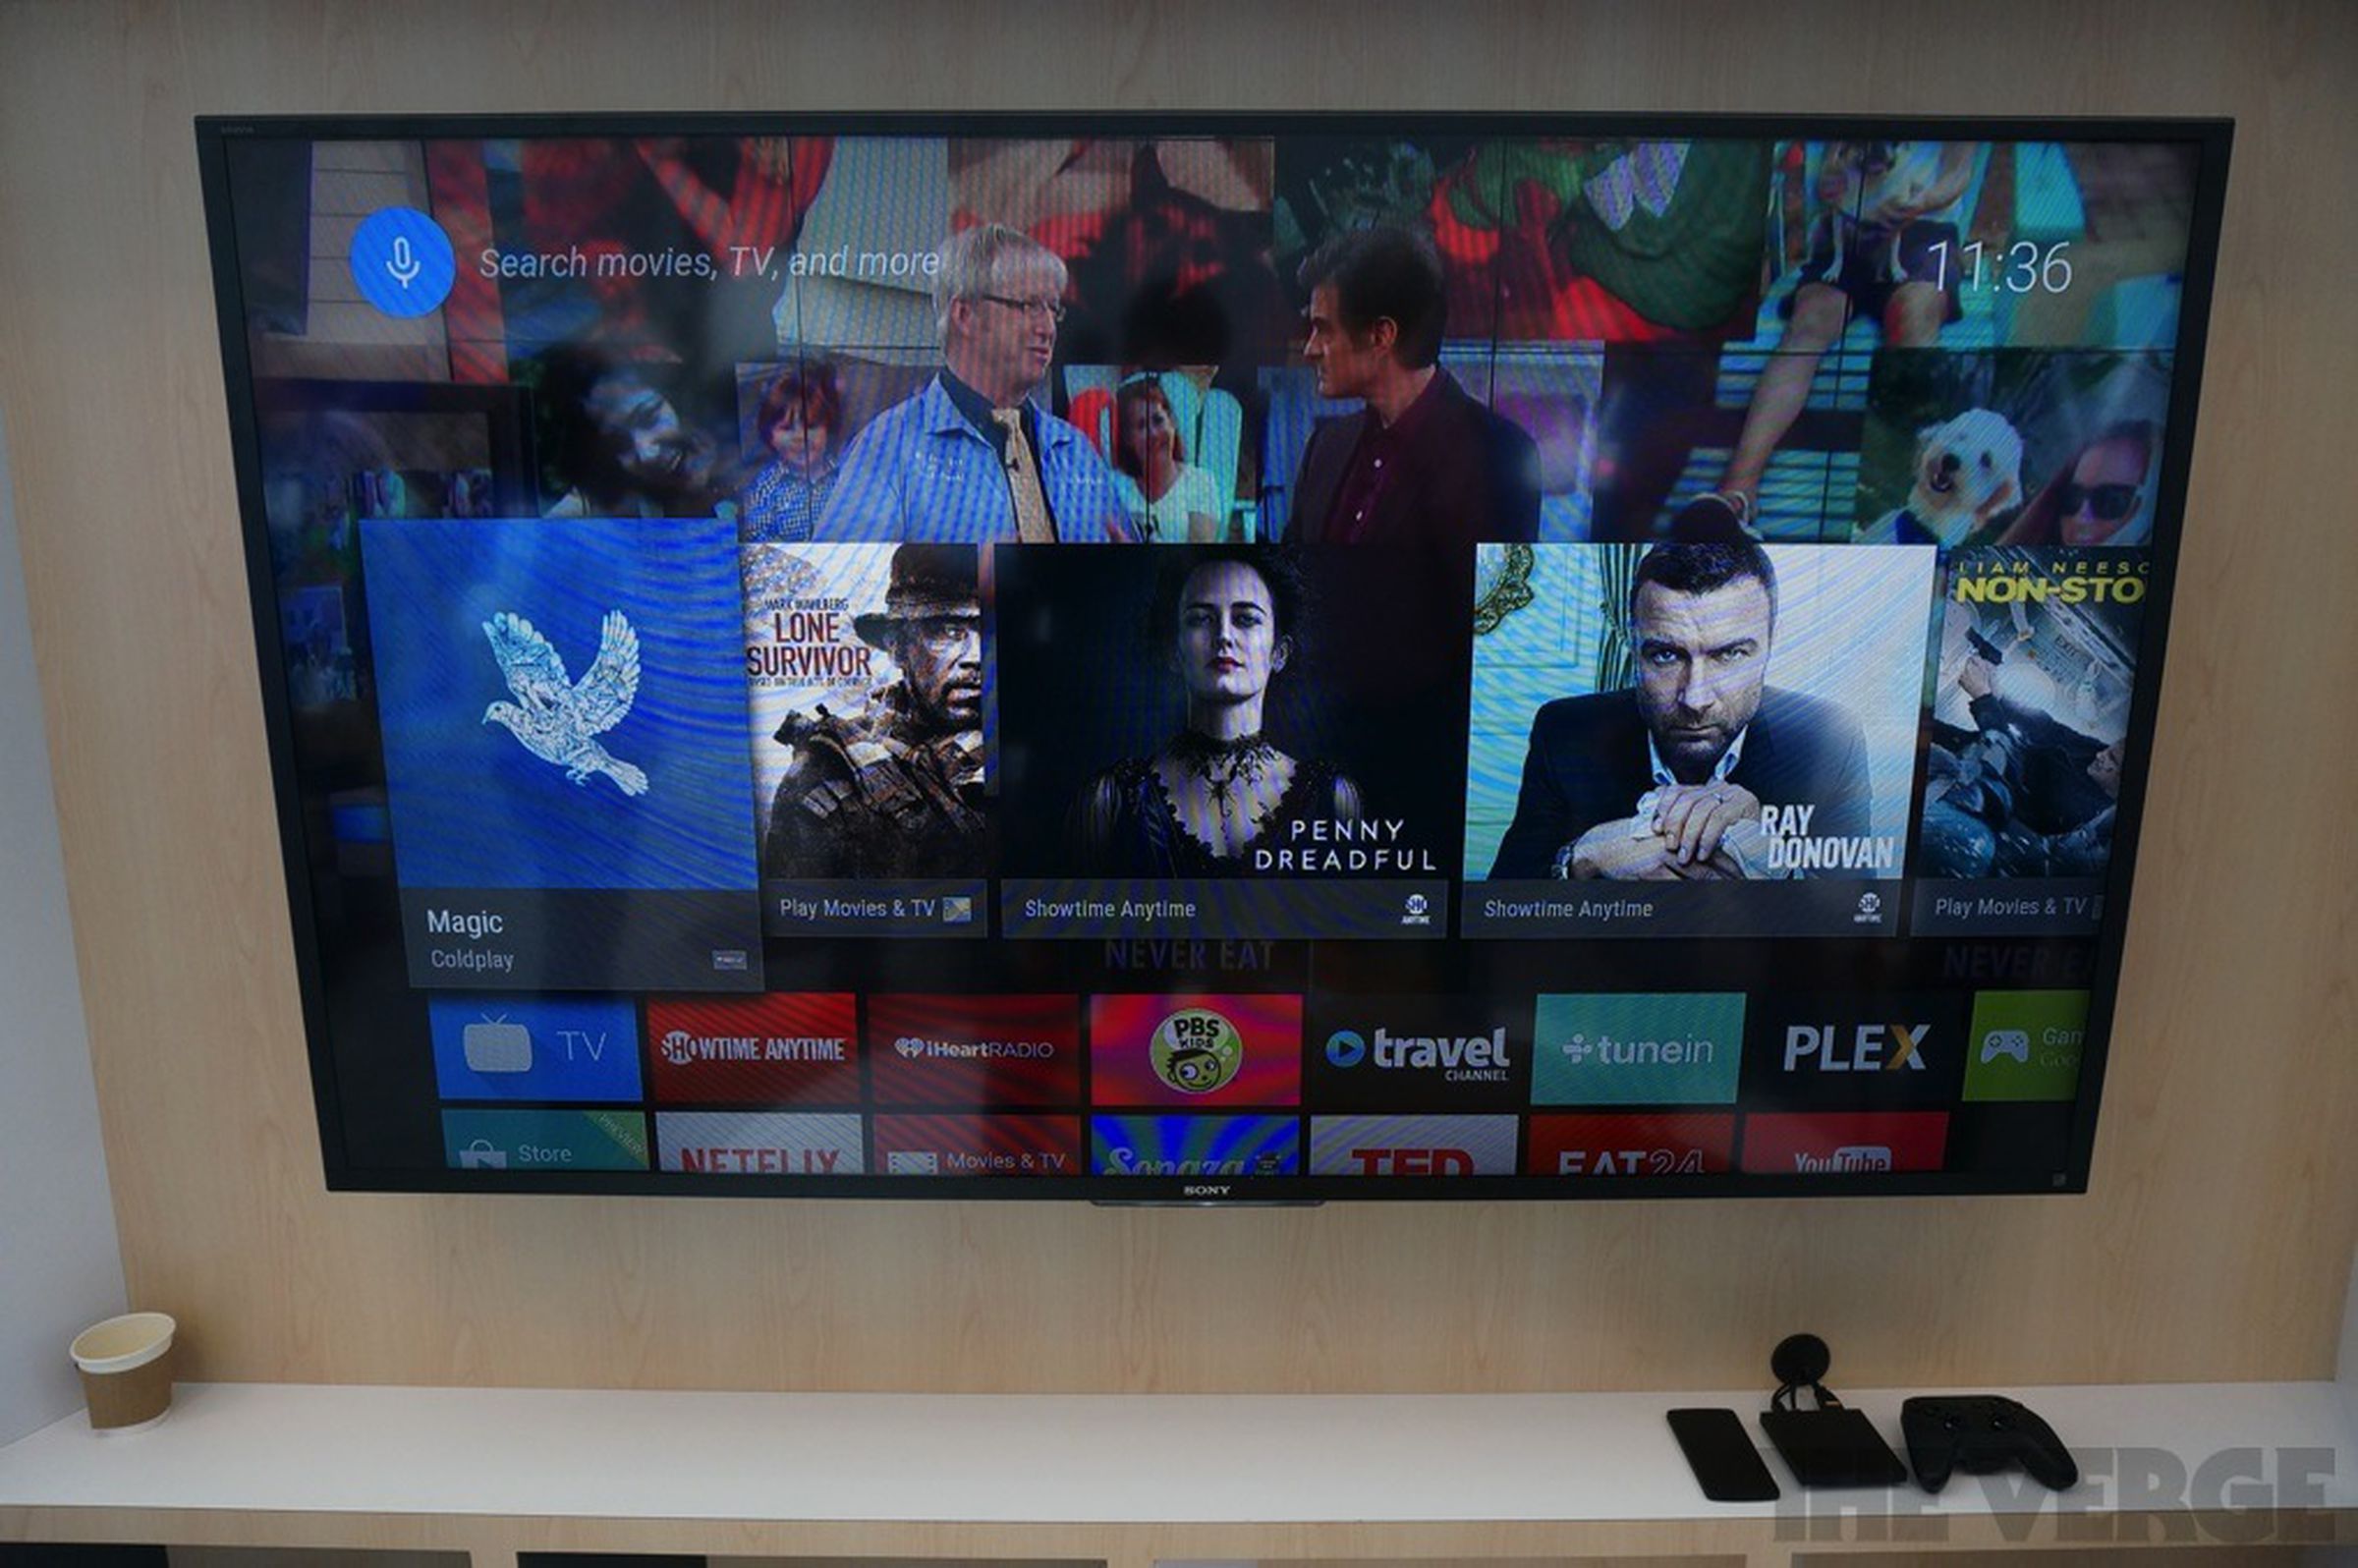 Android TV hands-on photos